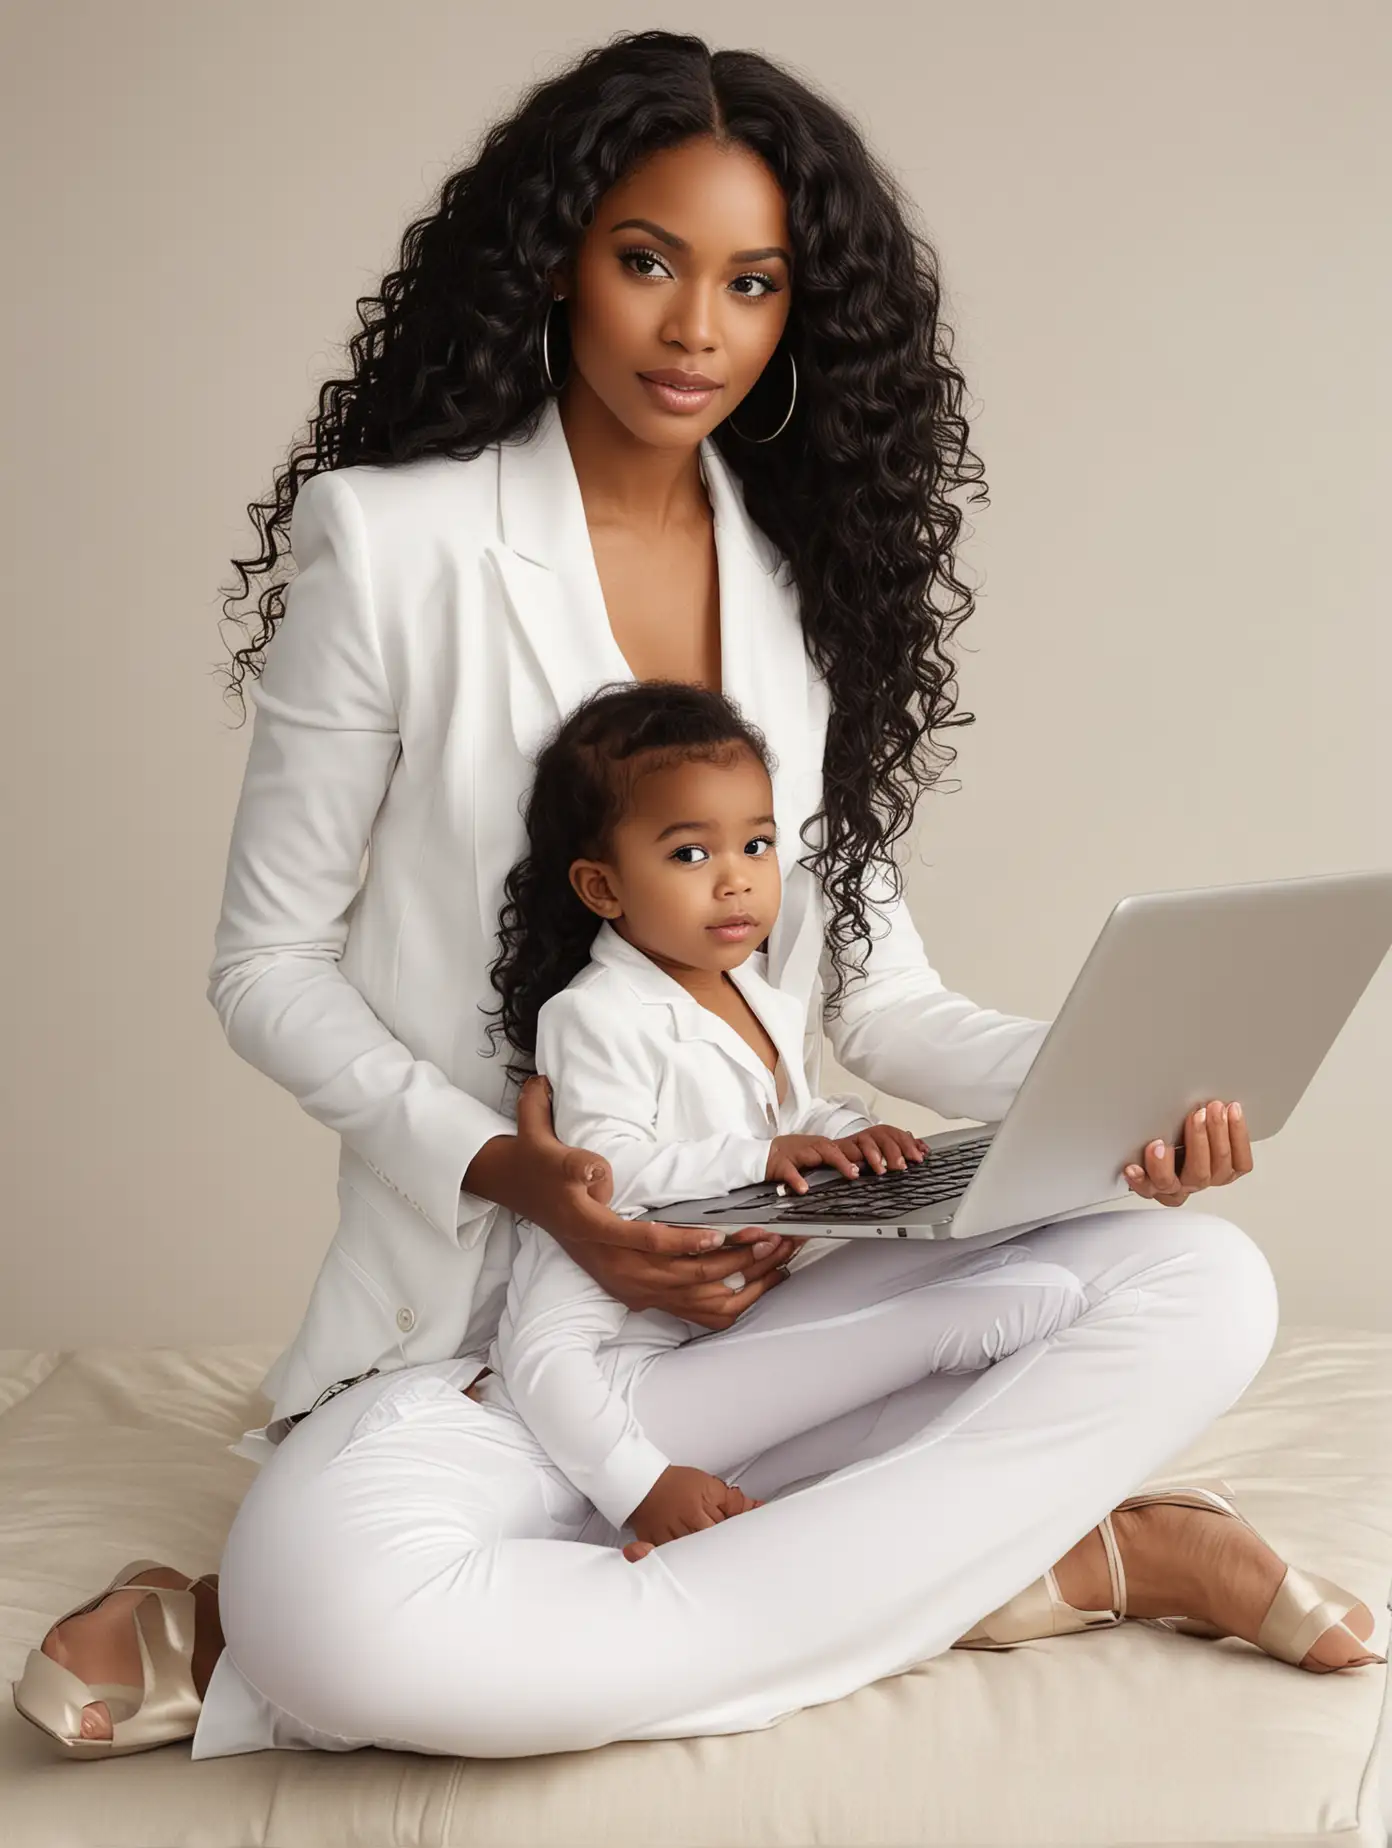 Confident African American Working Mother with Baby Girl in Chic White Suit